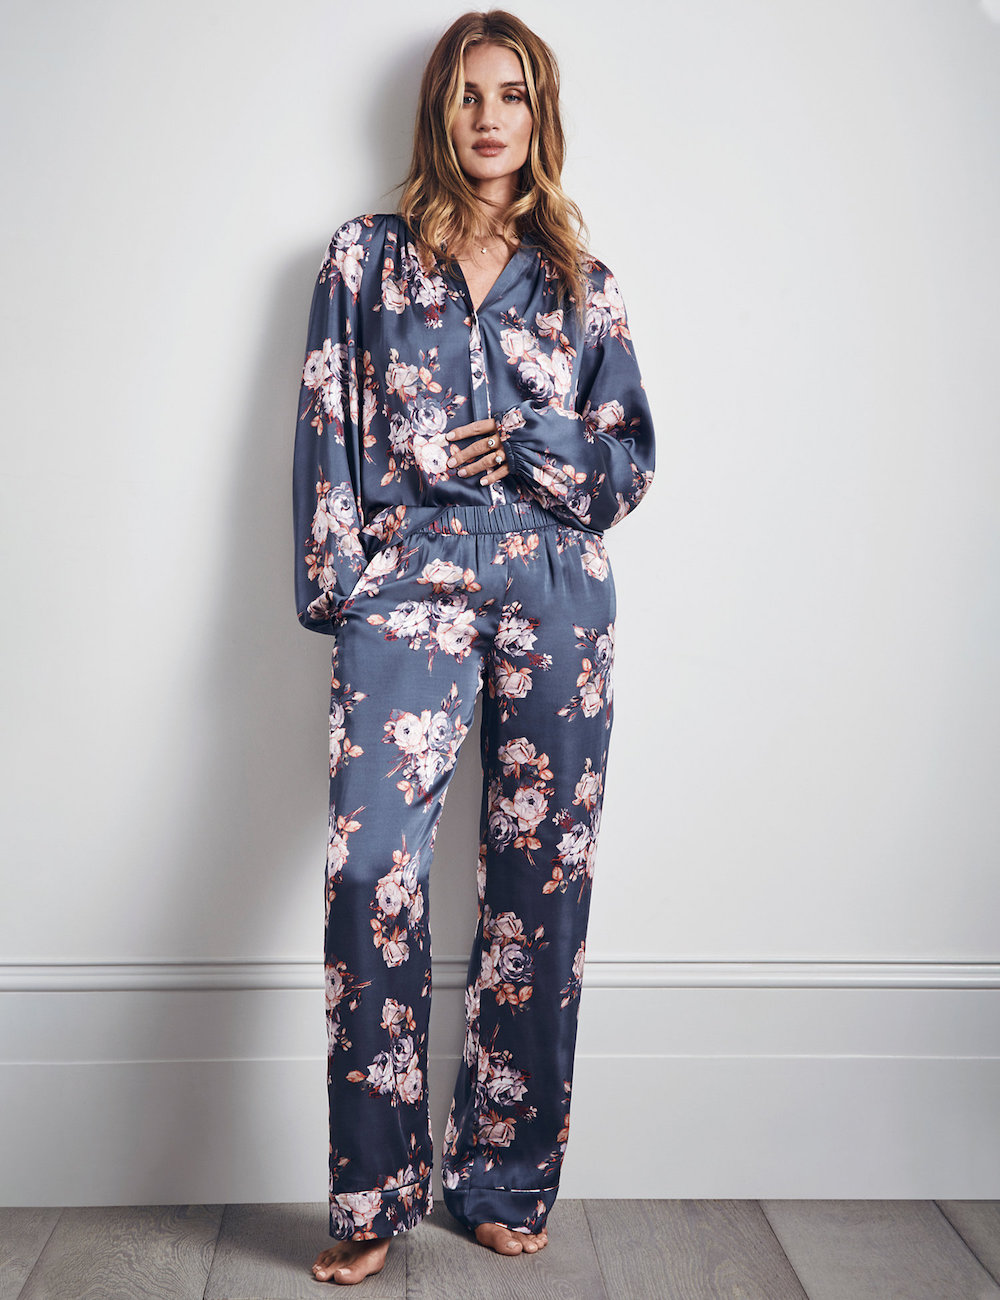 9 stylish pyjamas for a luxe lie-in